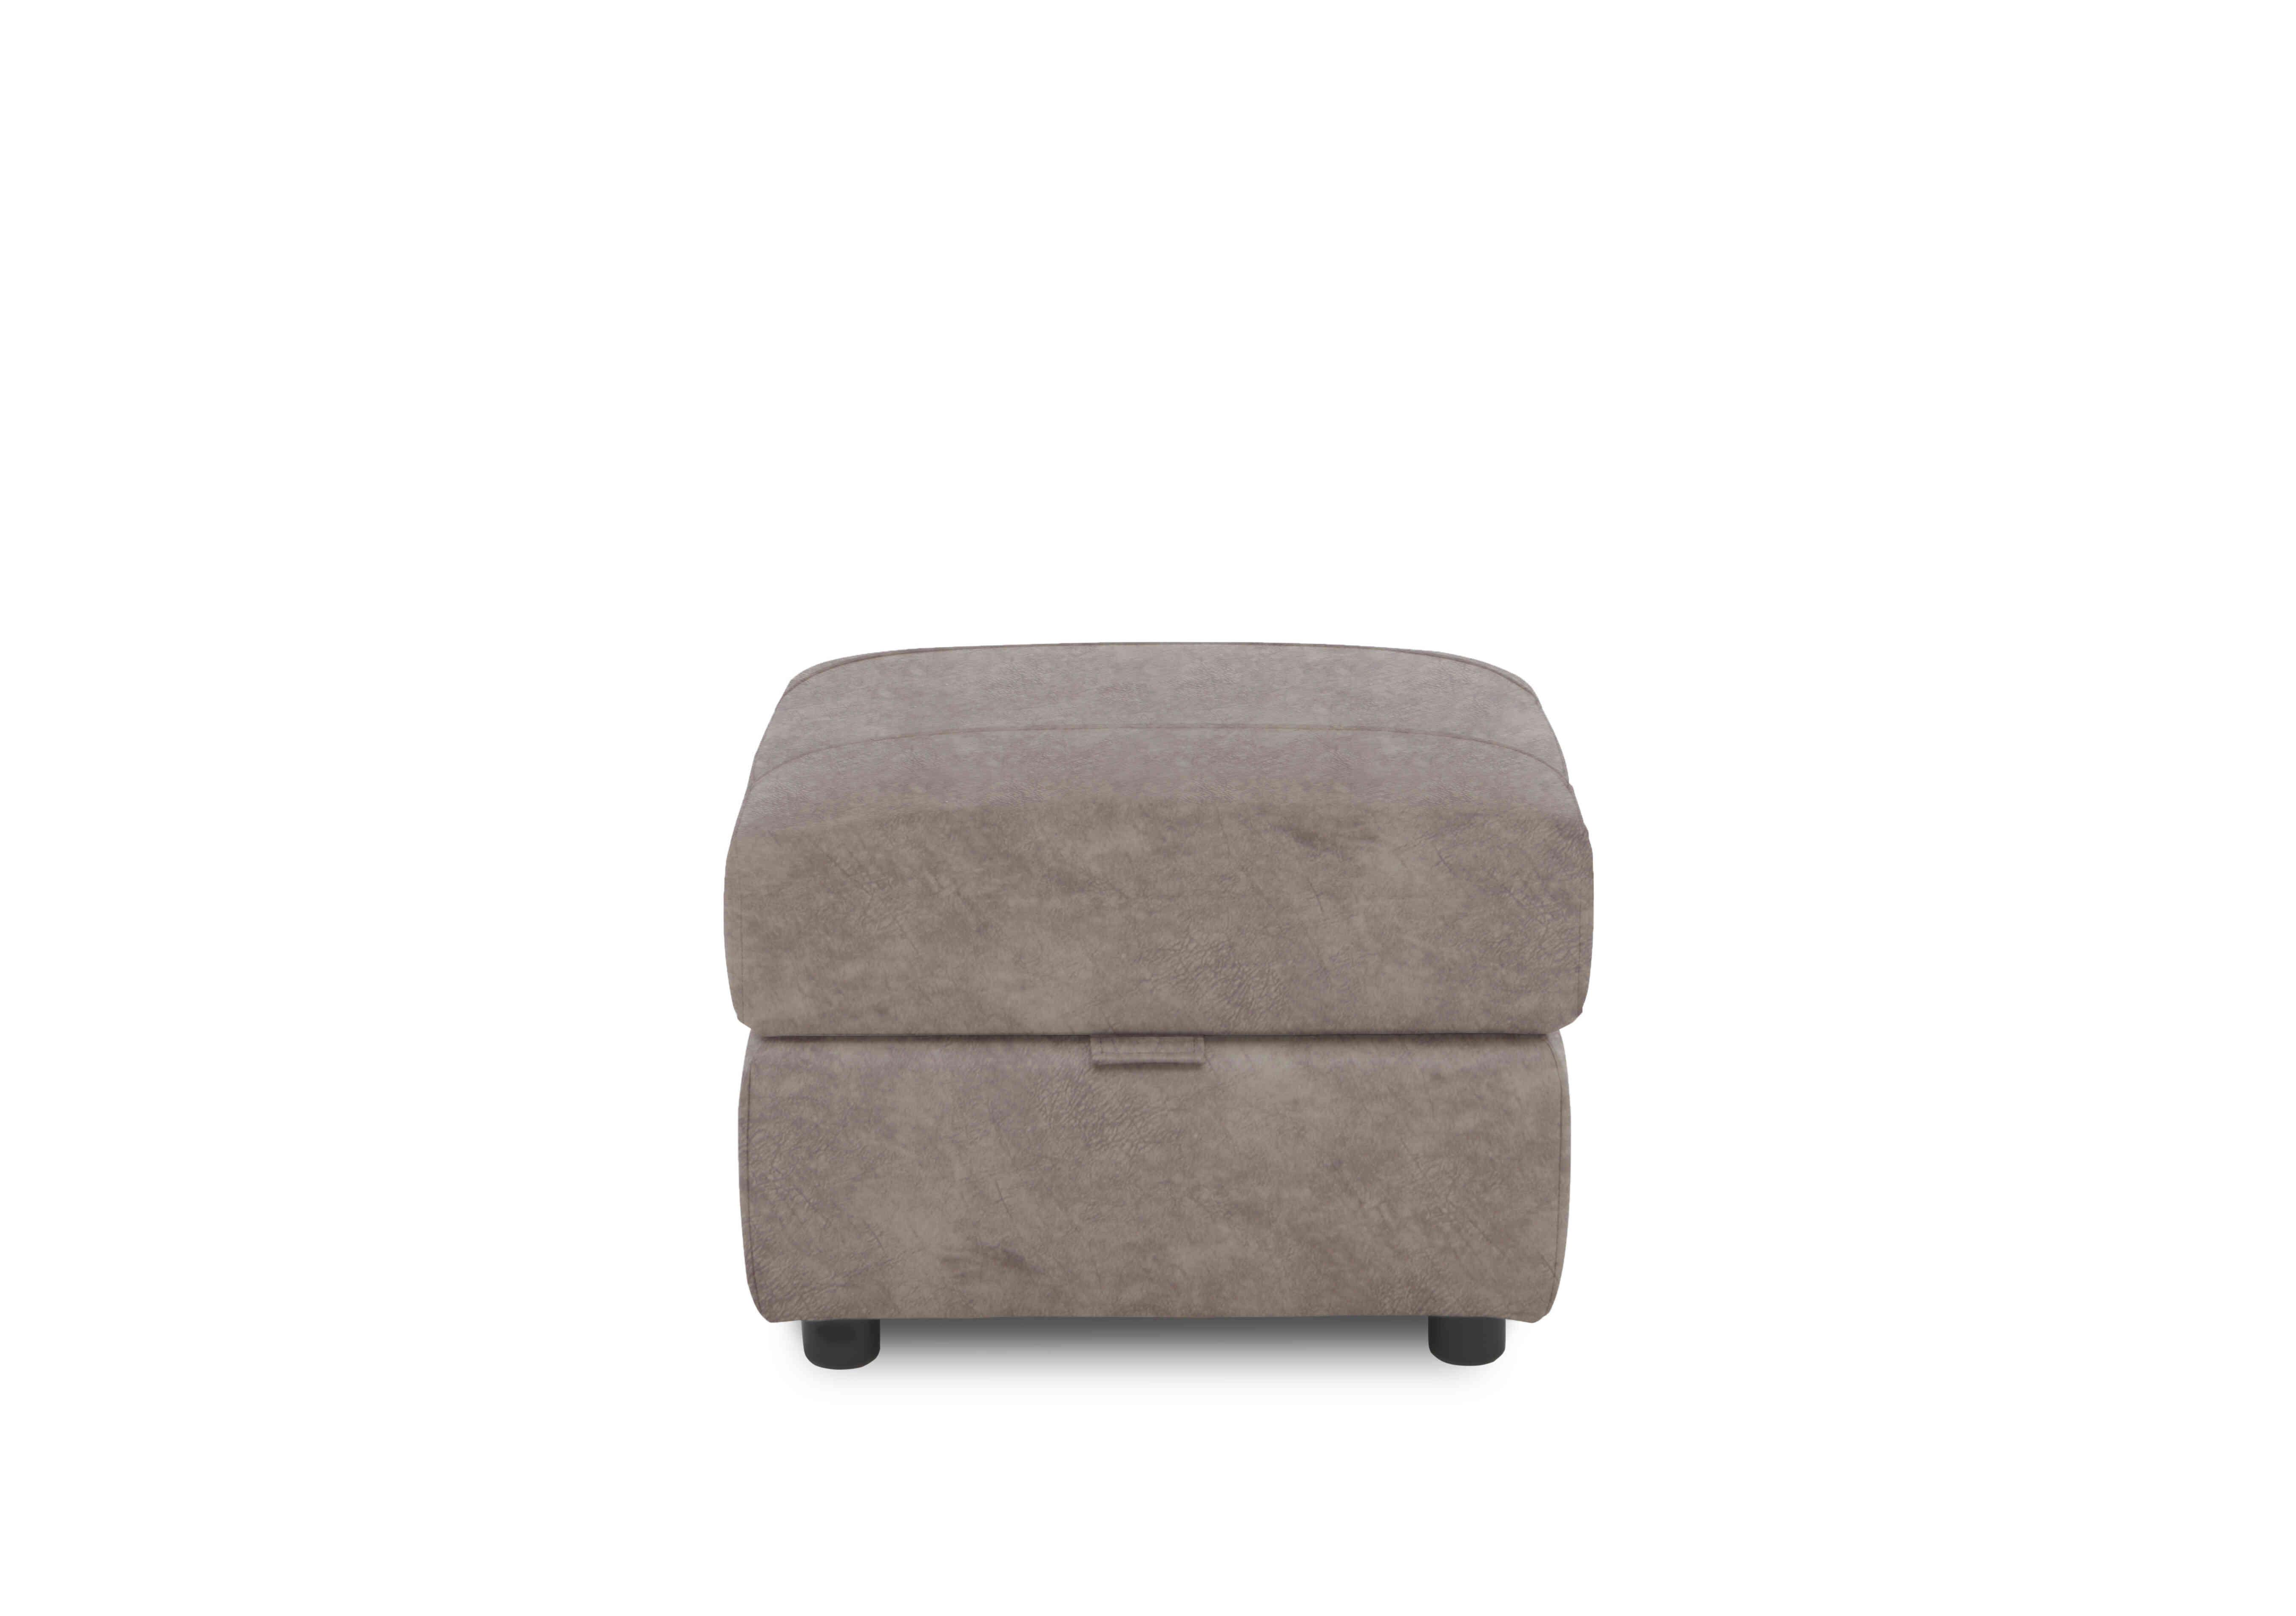 Sloane Fabric Storage Footstool in 18175 Marble Charcoal Grey on Furniture Village